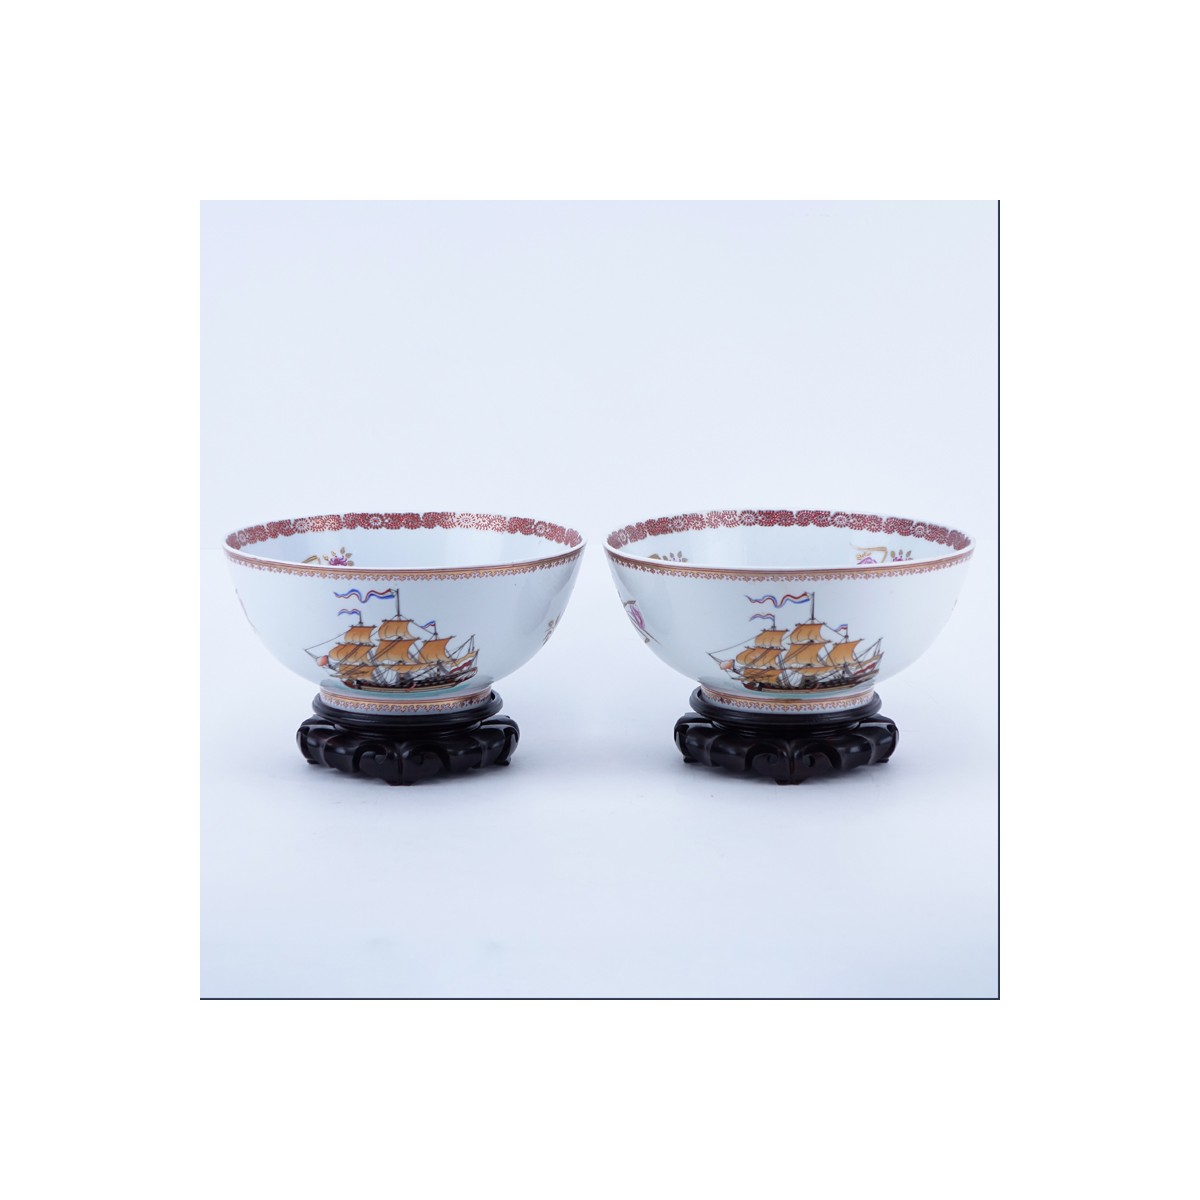 Pair 19/20th Century Chinese Export Hand Painted Porcelain Bowls On Stands. Depicting Western saili